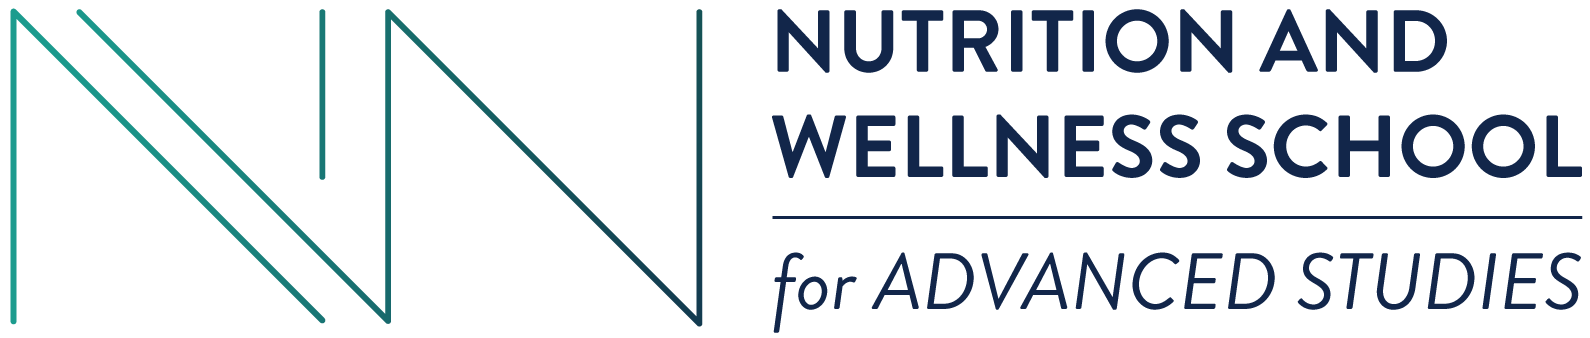 Nutrition and Wellness School For Advanced Studies